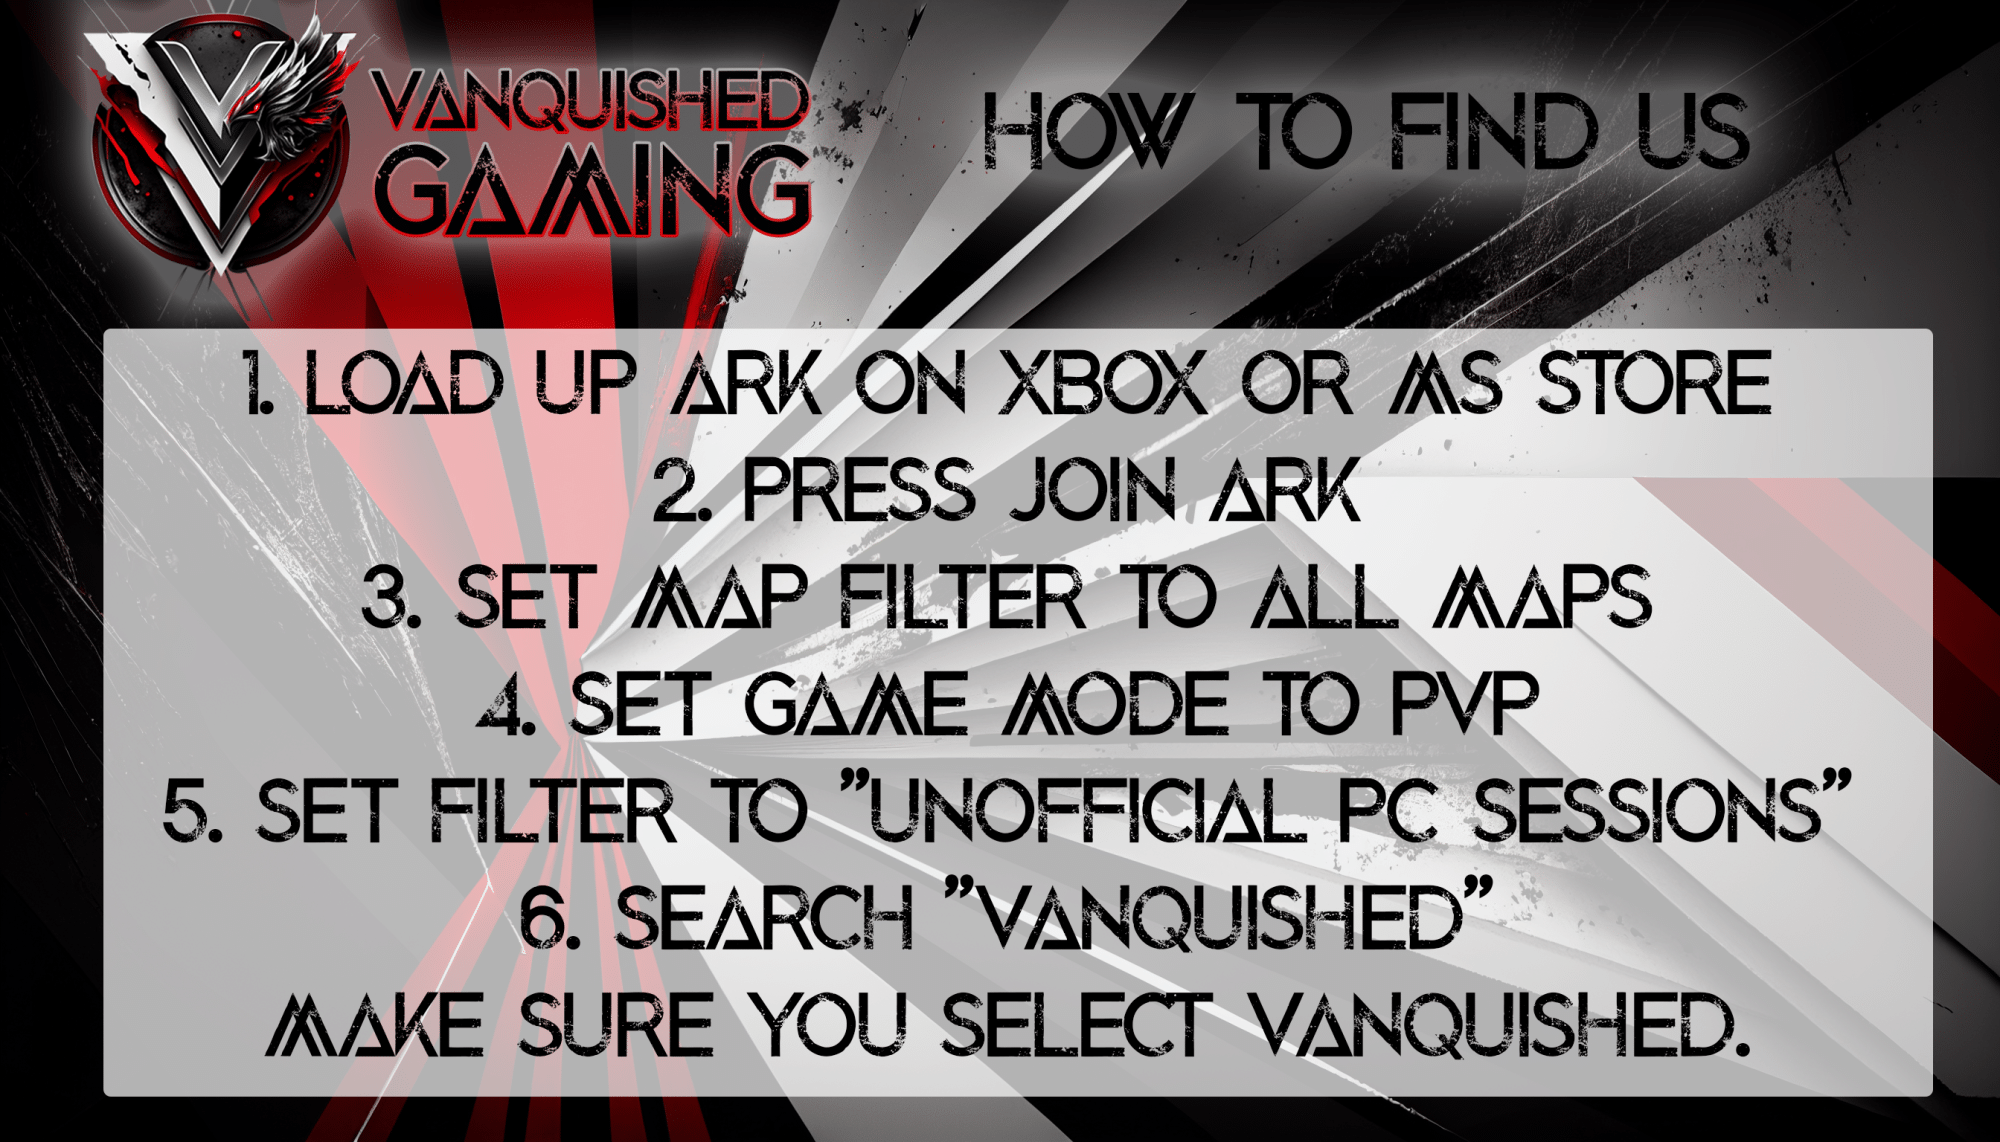 How To Find Us - Vanquished